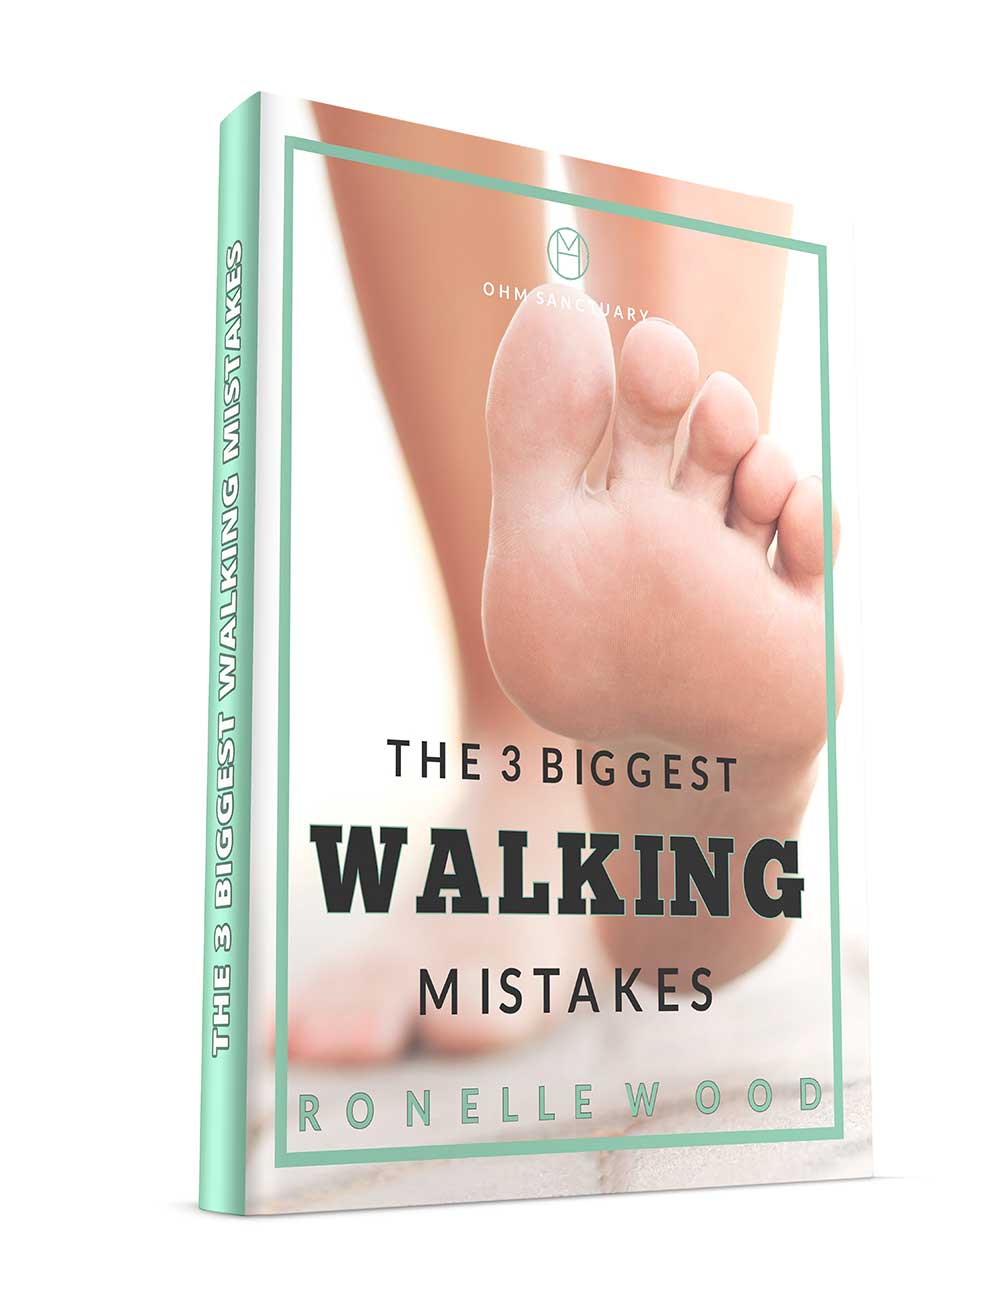 The 3 Biggest Walking Mistakes - Ronelle Wood